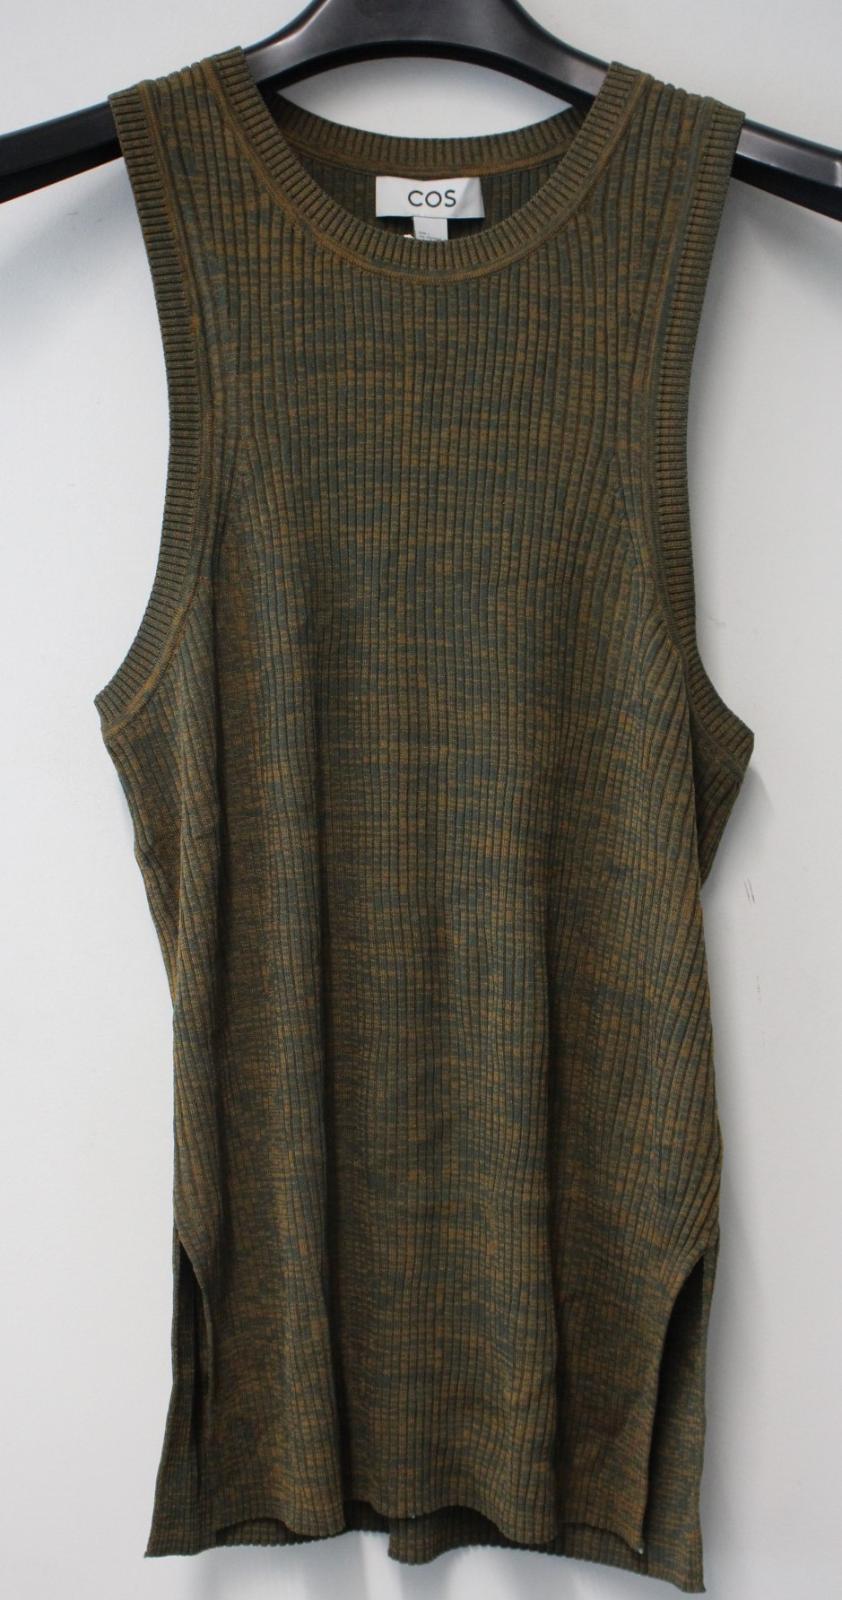 COS Ladies Olive Brown Stretch Fit Ribbed Knit Sleeveless Vest Top Size L NEW